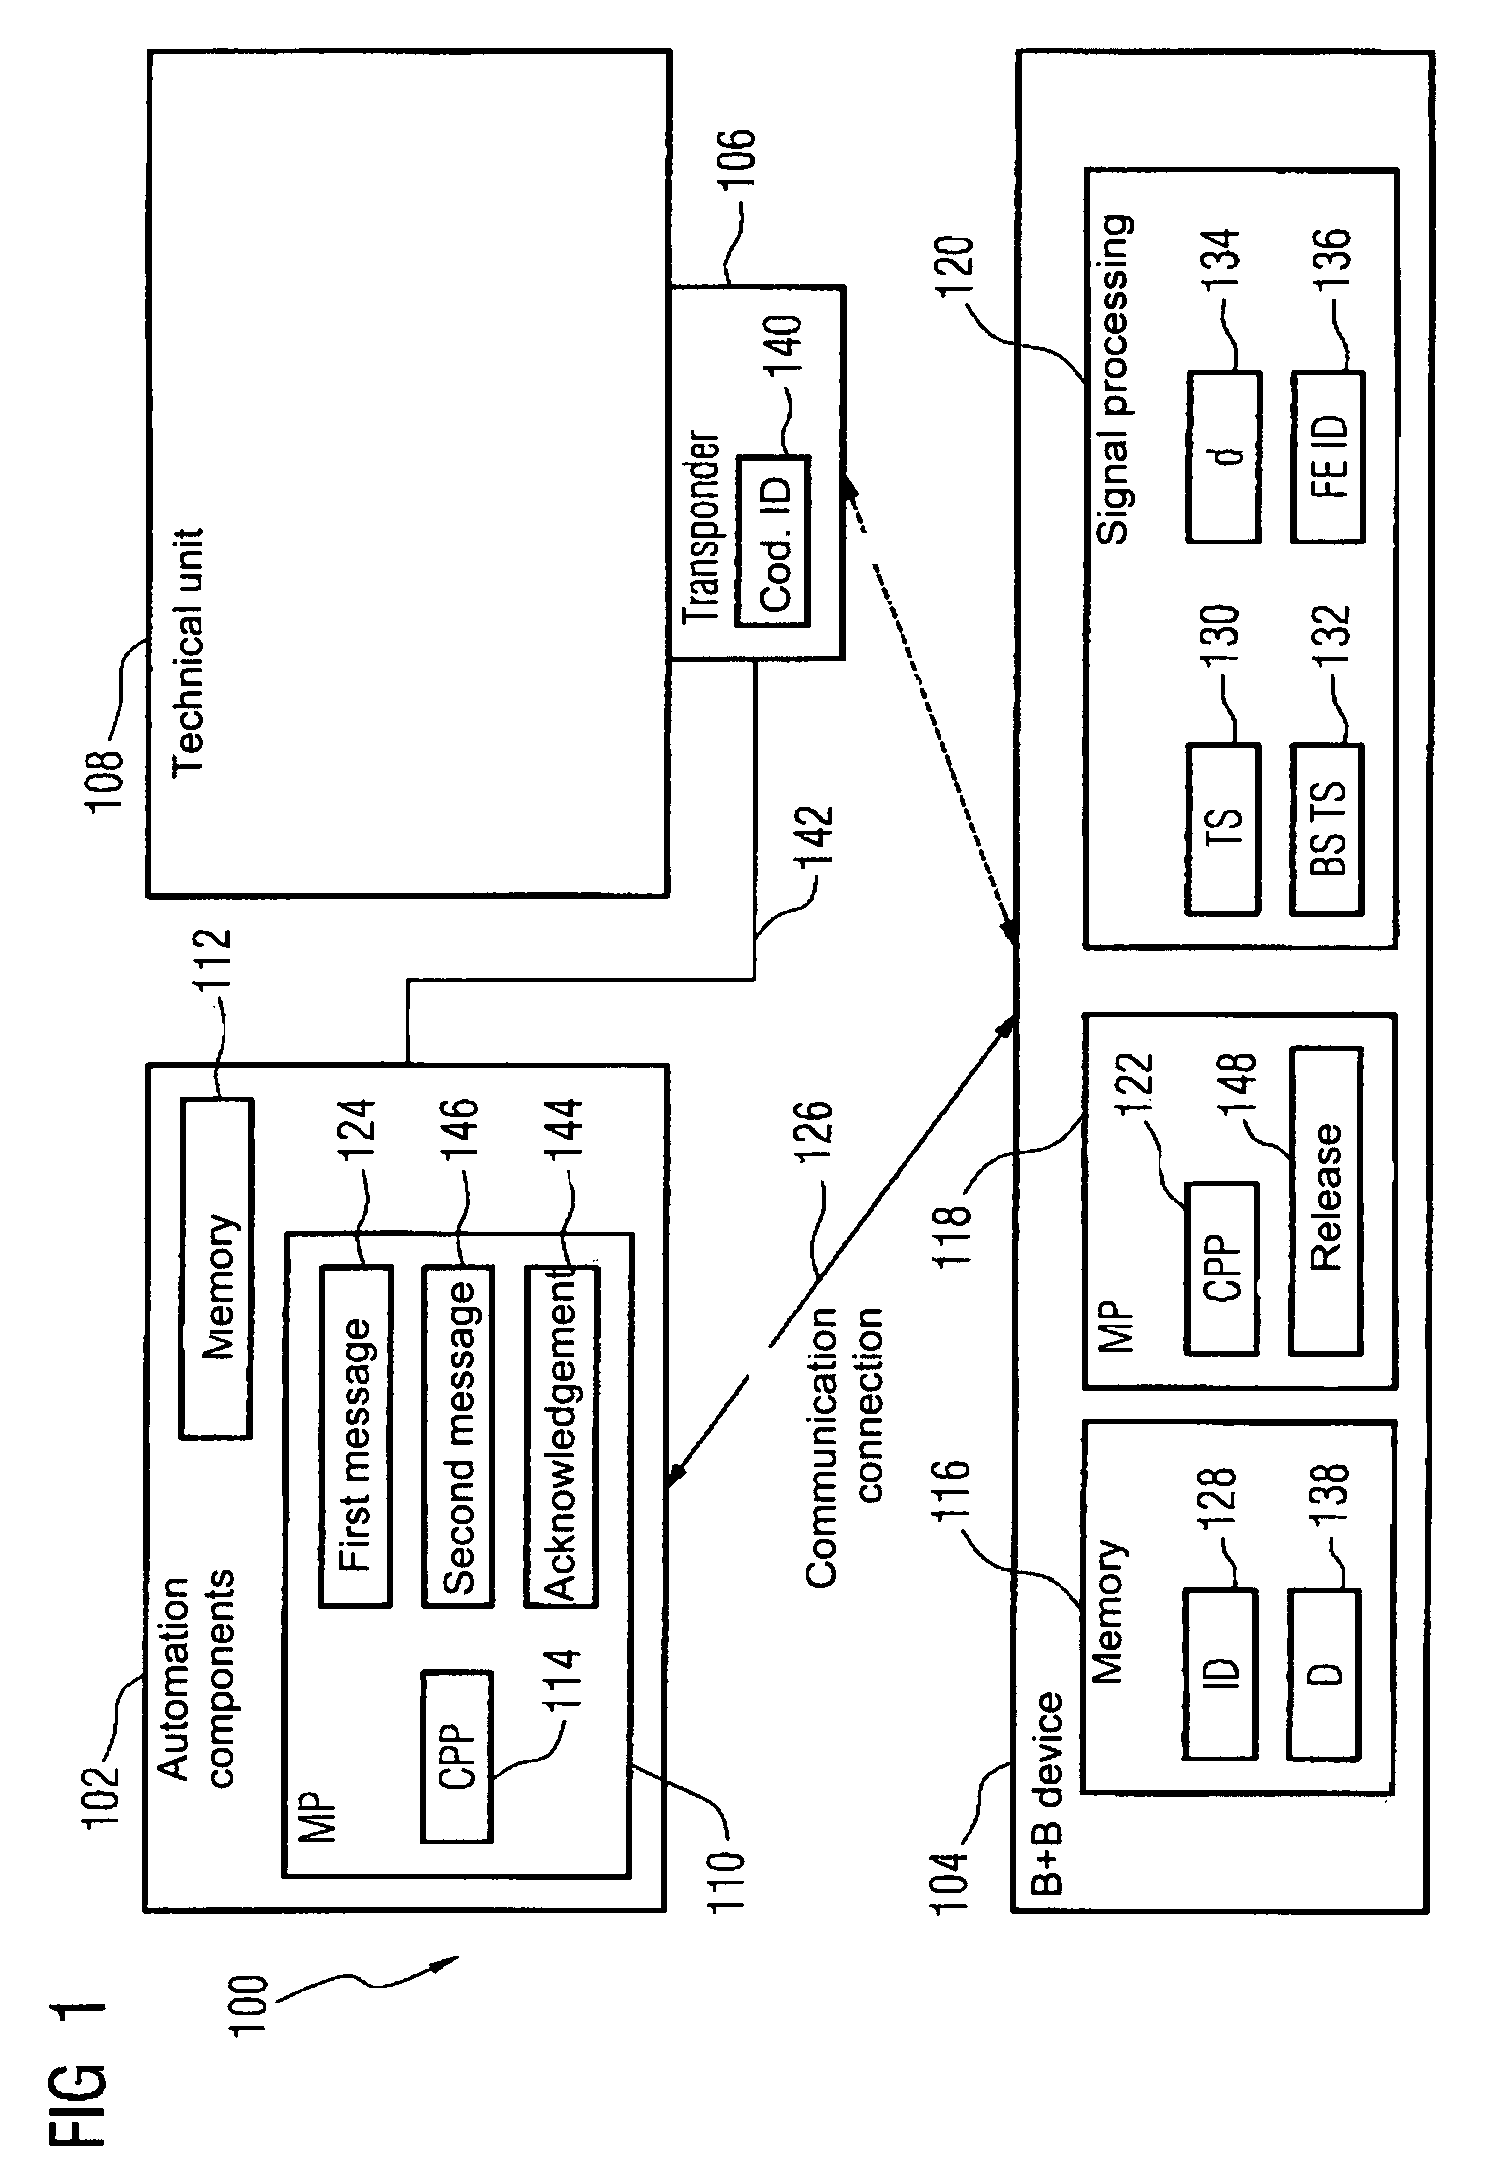 Method for enabling the operation of automation components of a technical system via a mobile control and monitoring device